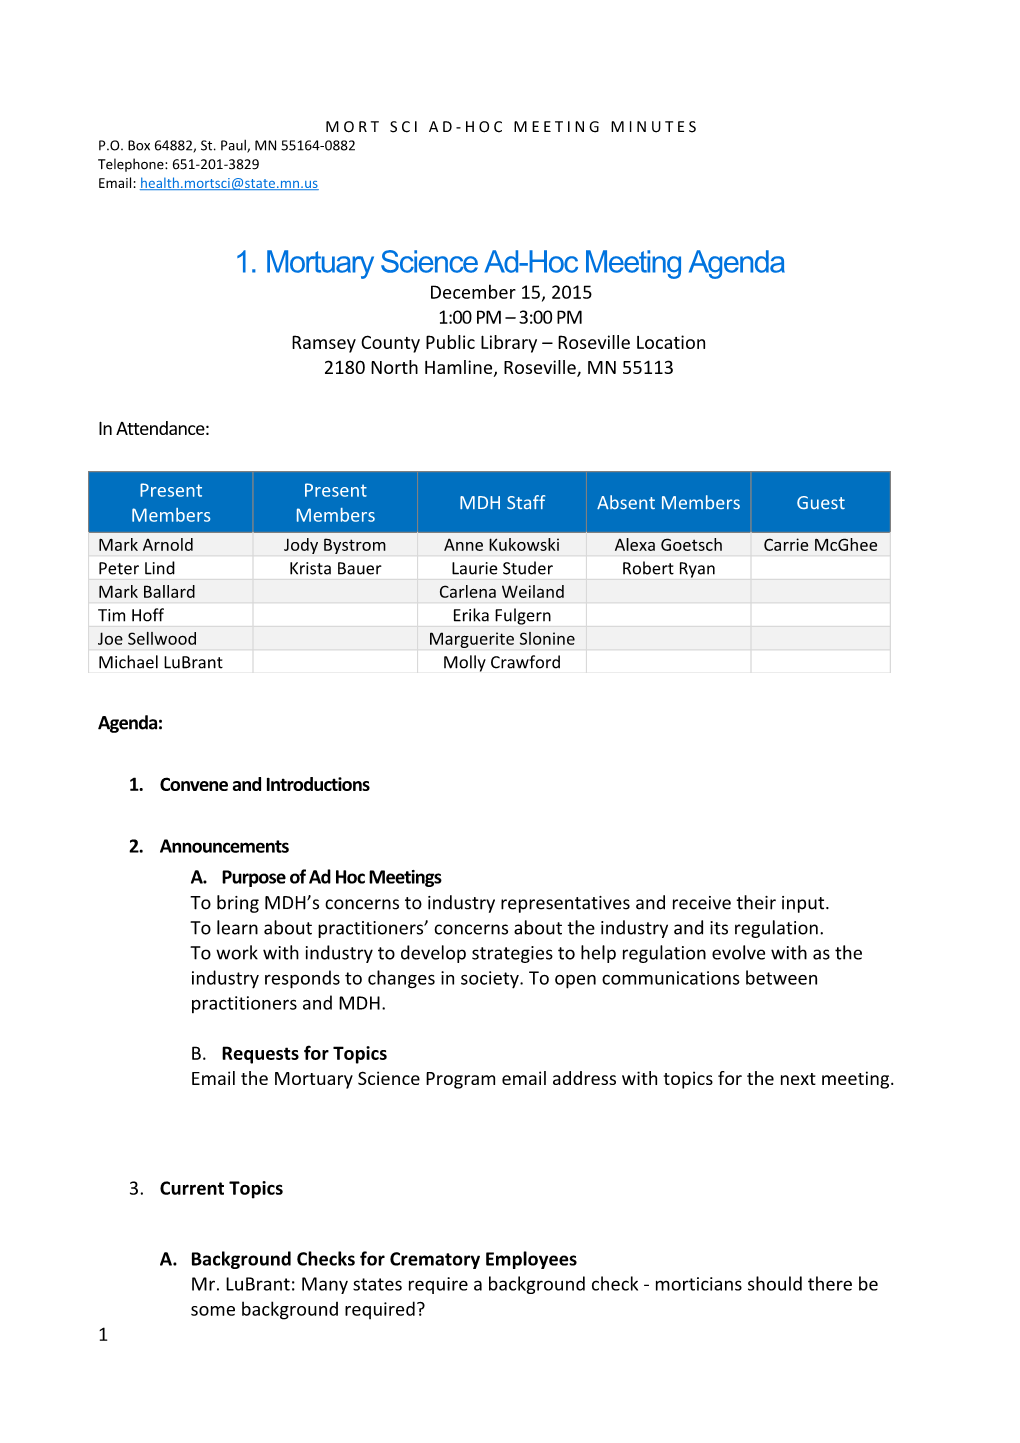 Mortuary Science Ad-Hoc Meeting Minutes for 12-15-15 Meeting